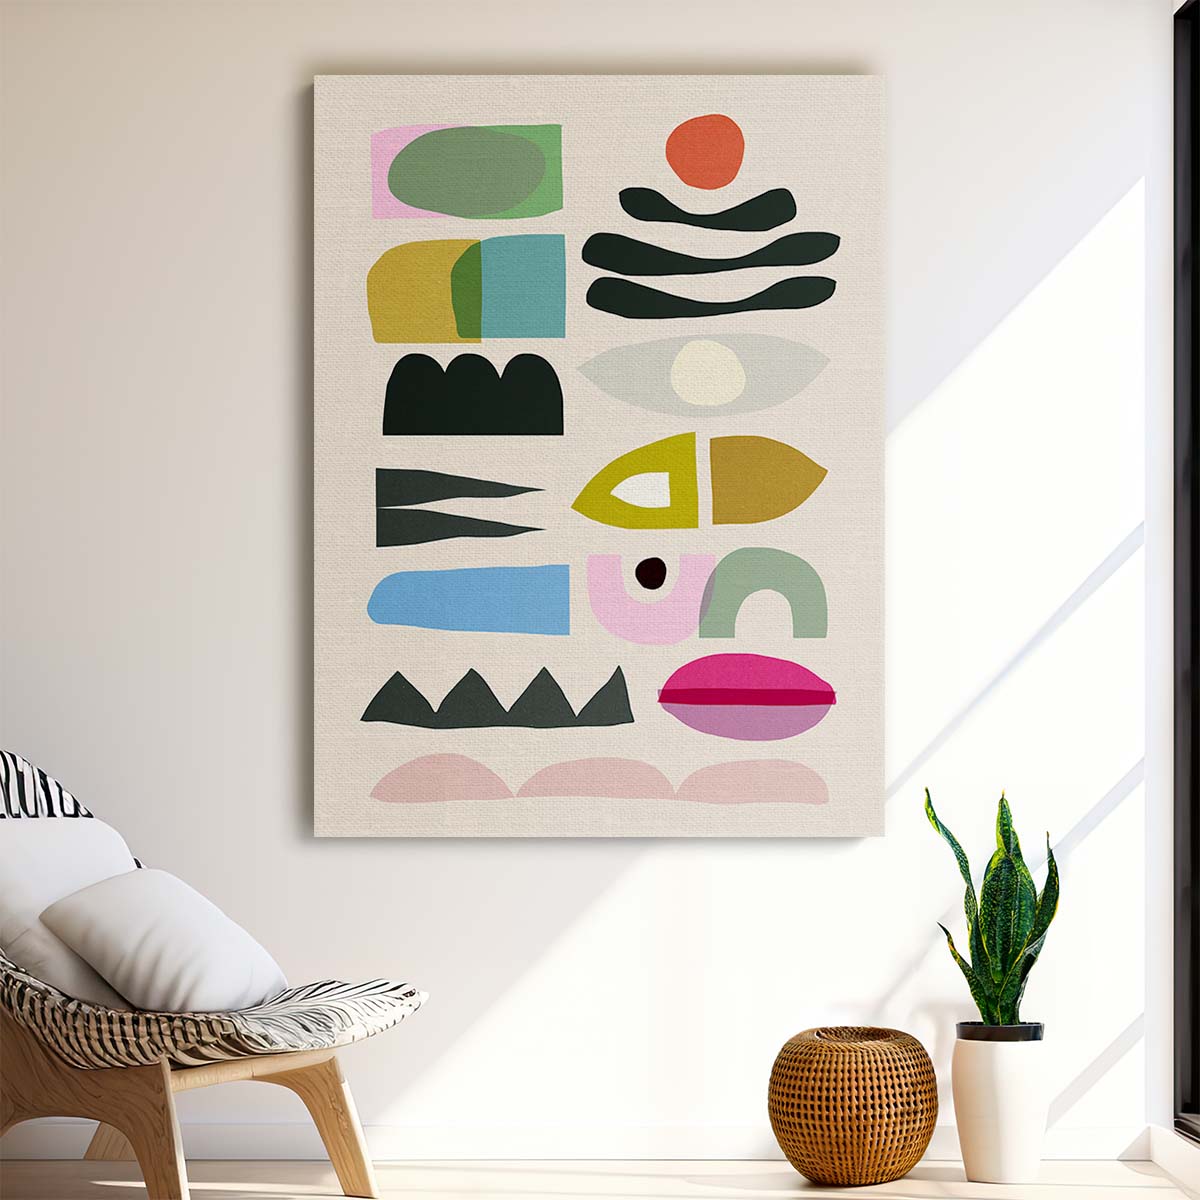 Dan Hobday's Abstract Geometry Nord No2 Illustration, Organic Bright Colors by Luxuriance Designs, made in USA